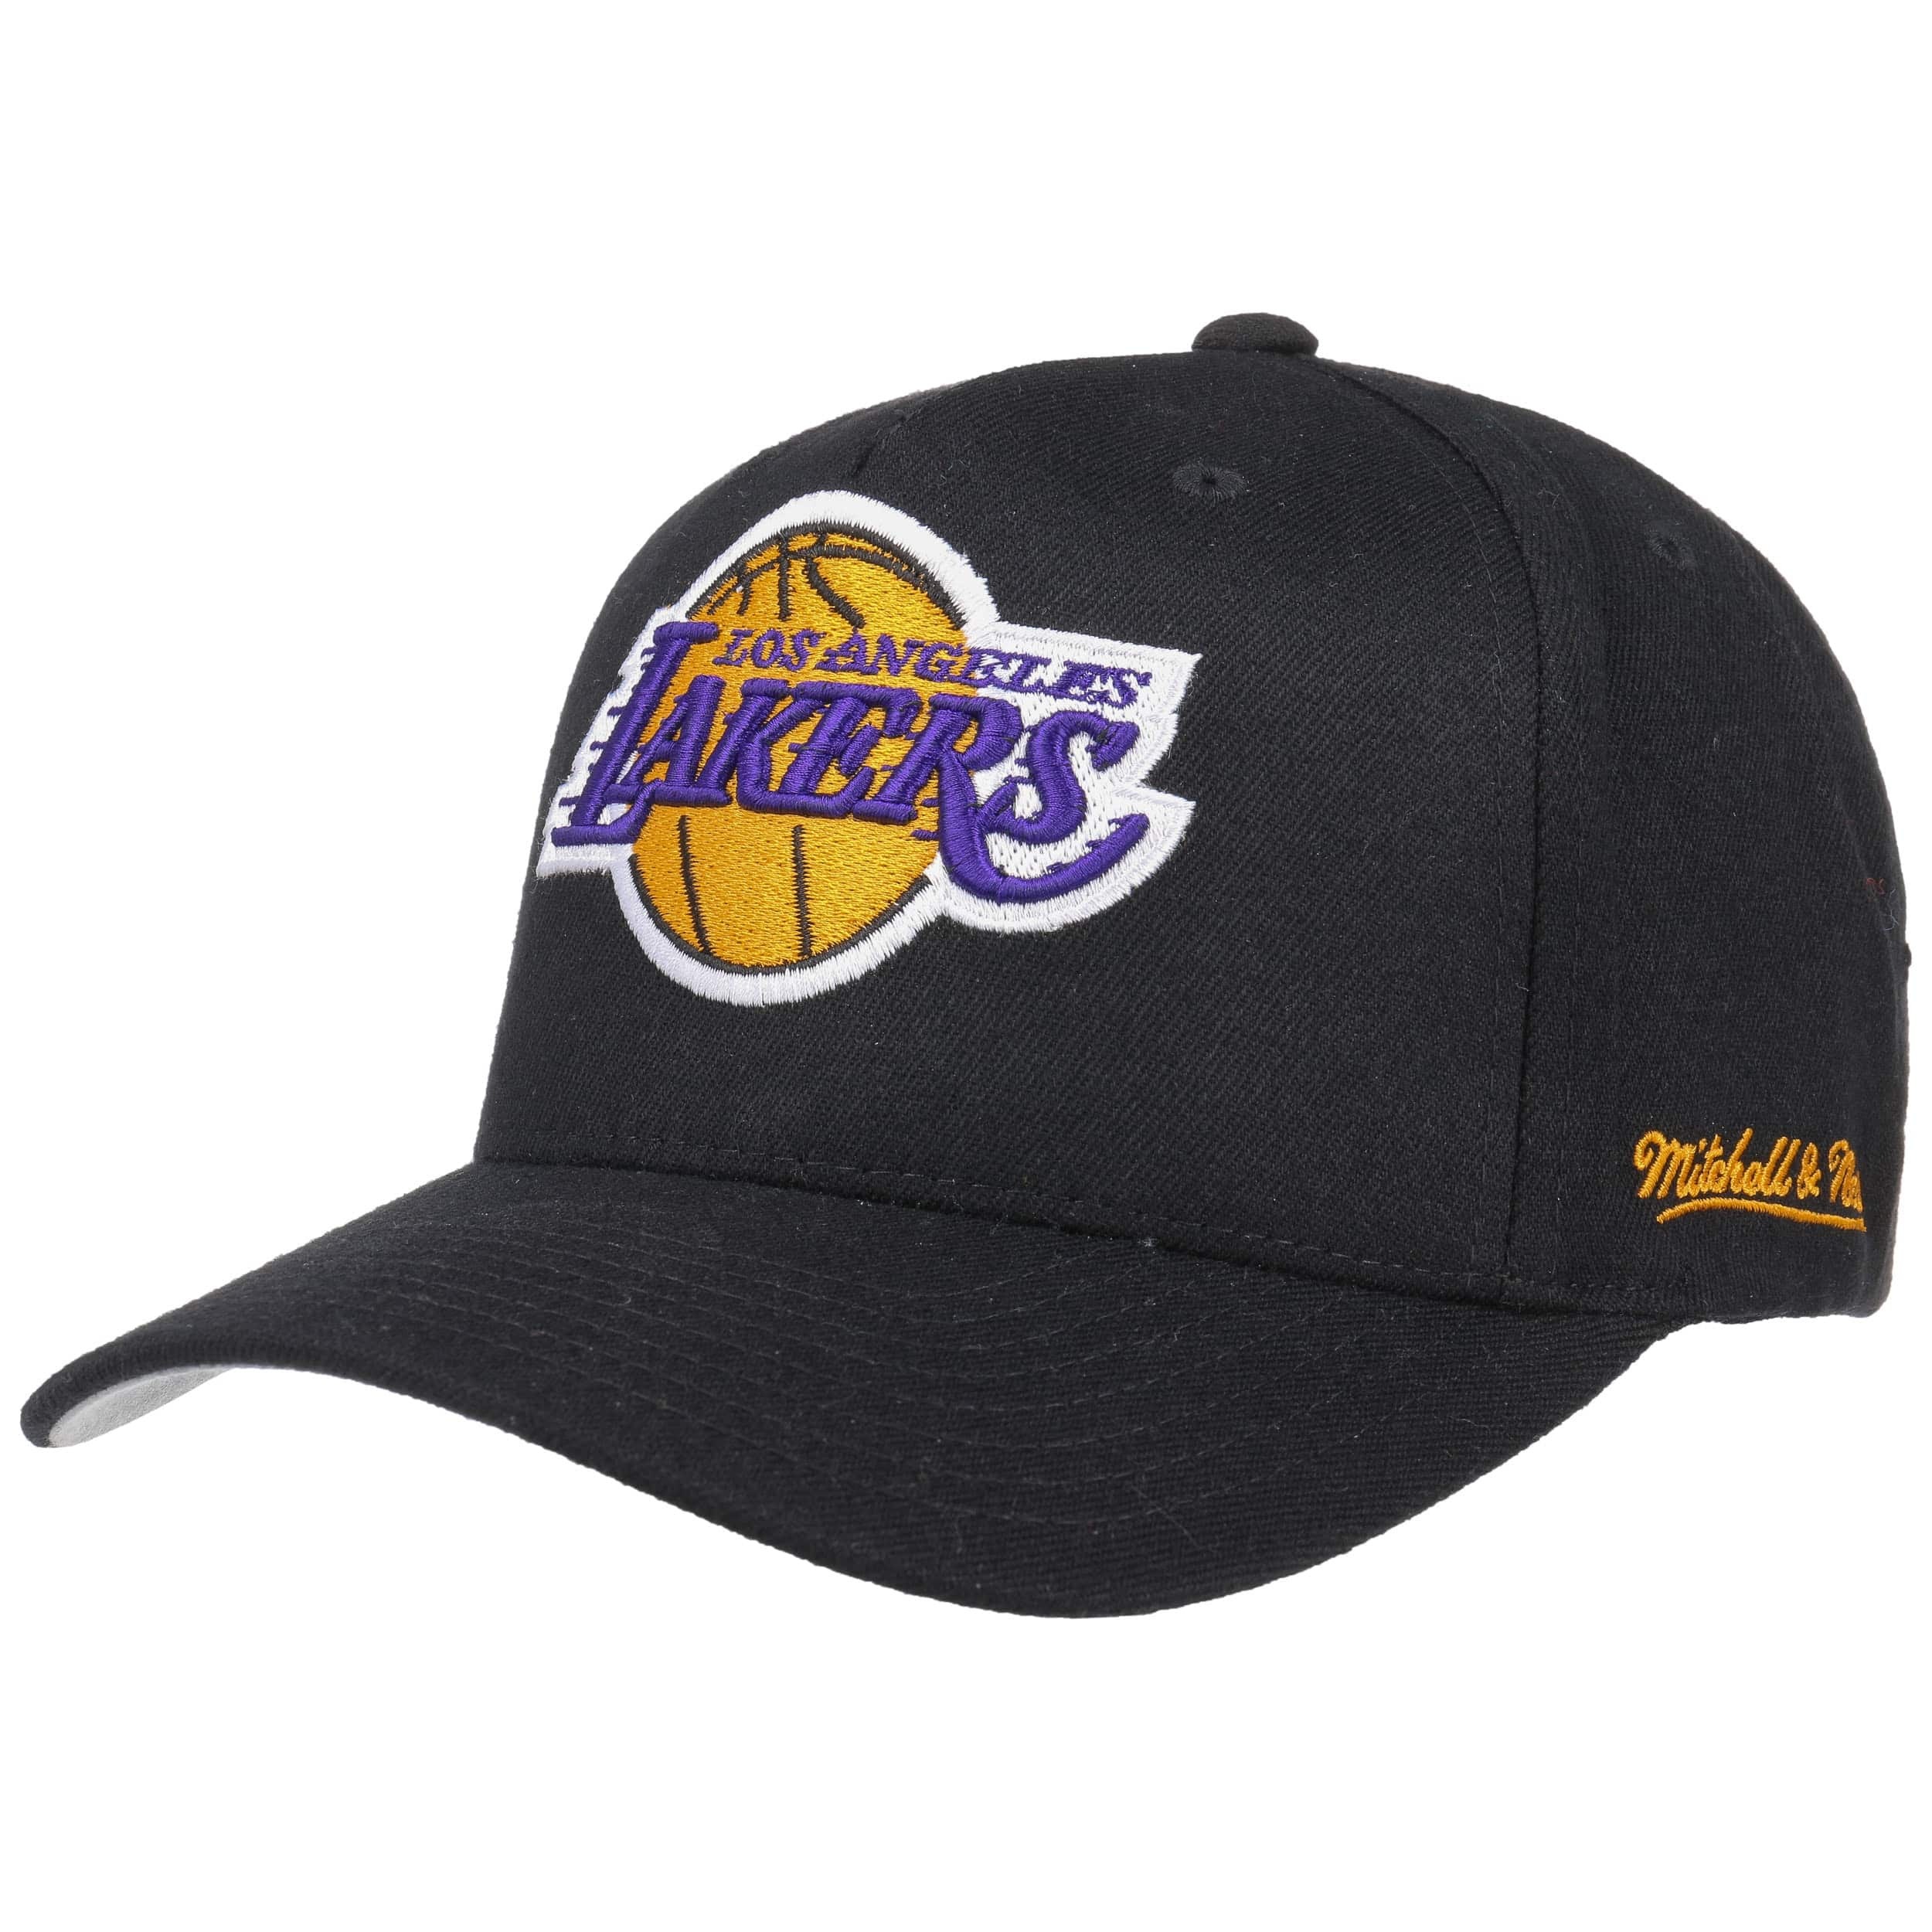 Eazy 110 Lakers NBA Cap by Mitchell & Ness